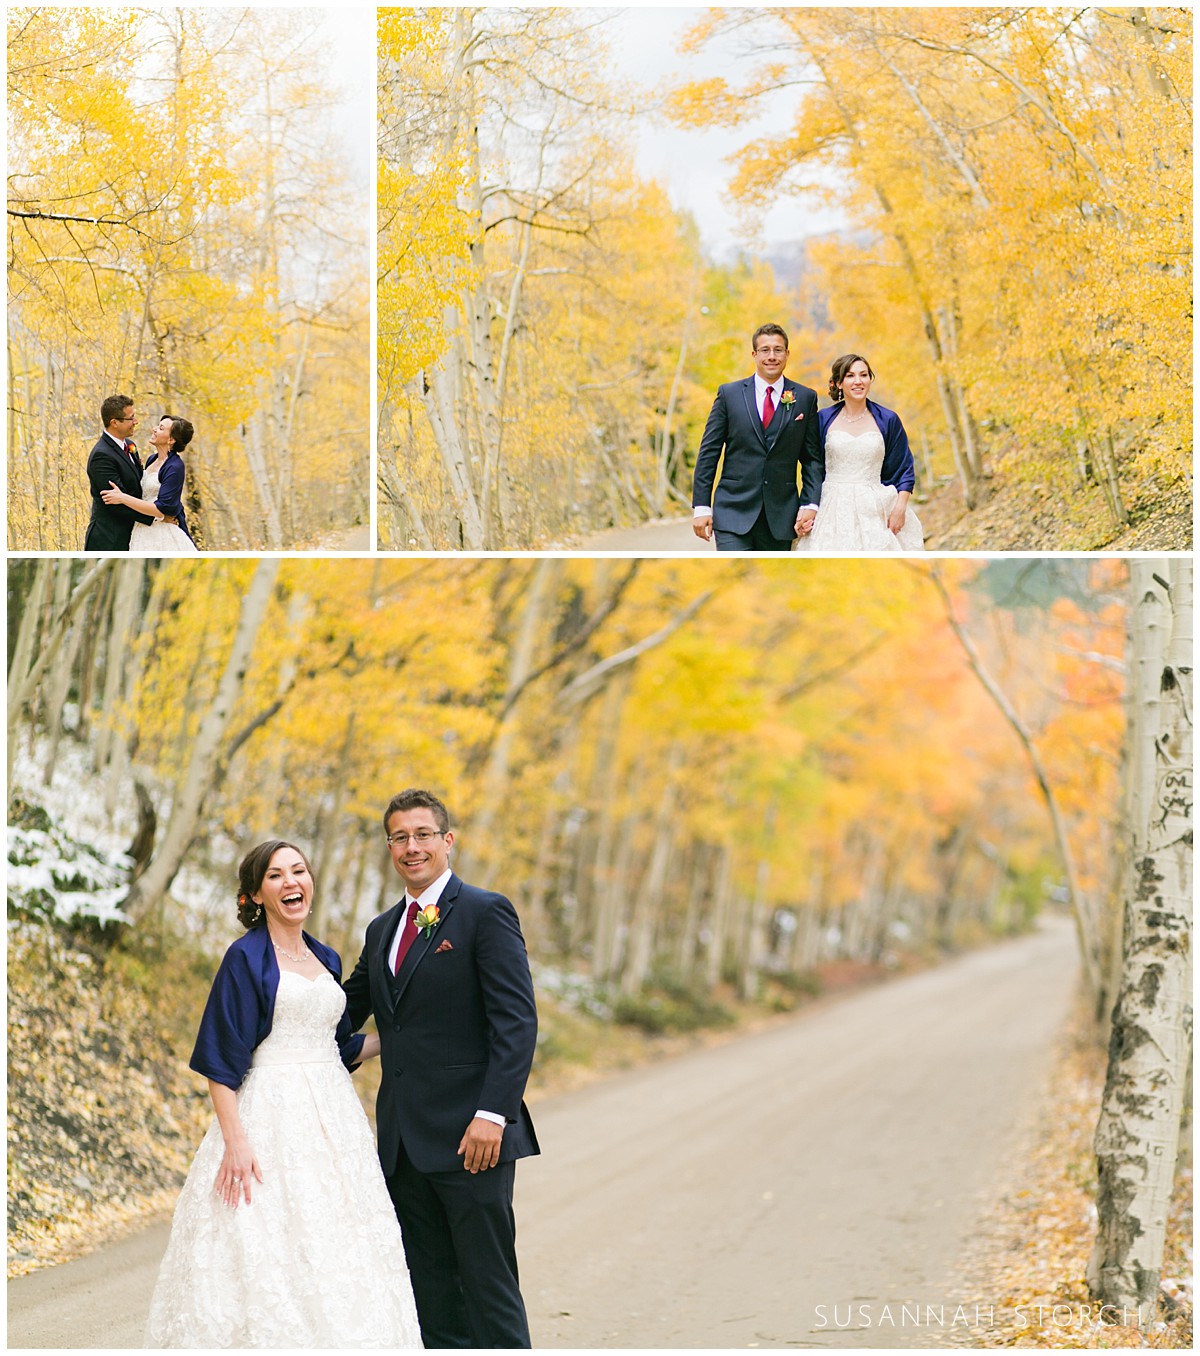 three images of a wedding couple standing among yellow aspens